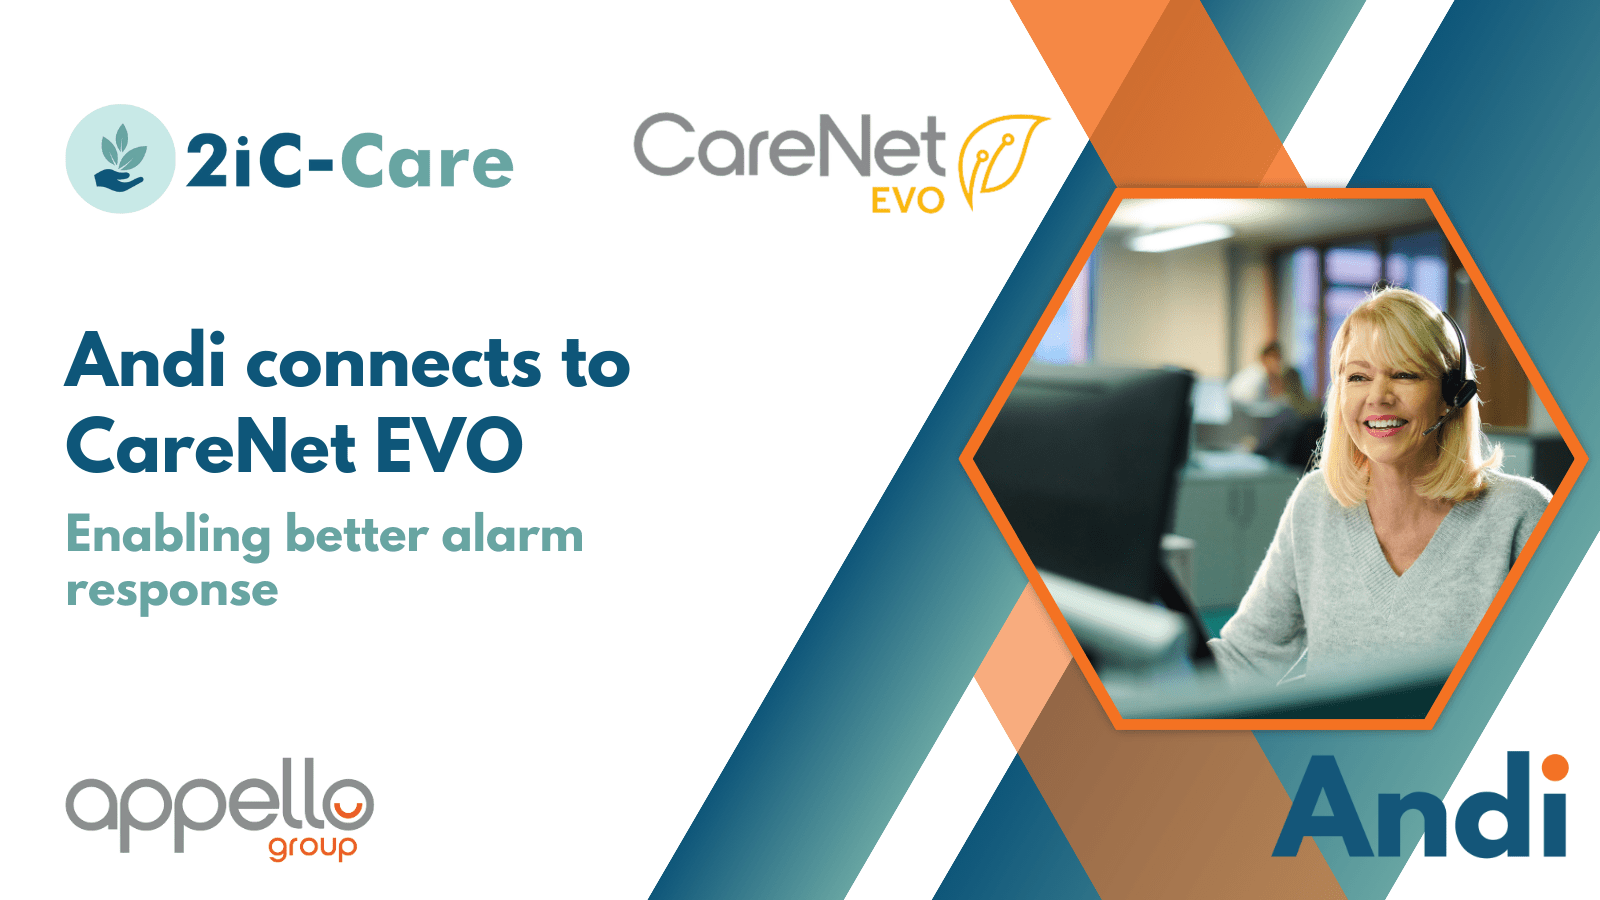 Andi connects to CareNet Evo to enable better alarm response. 